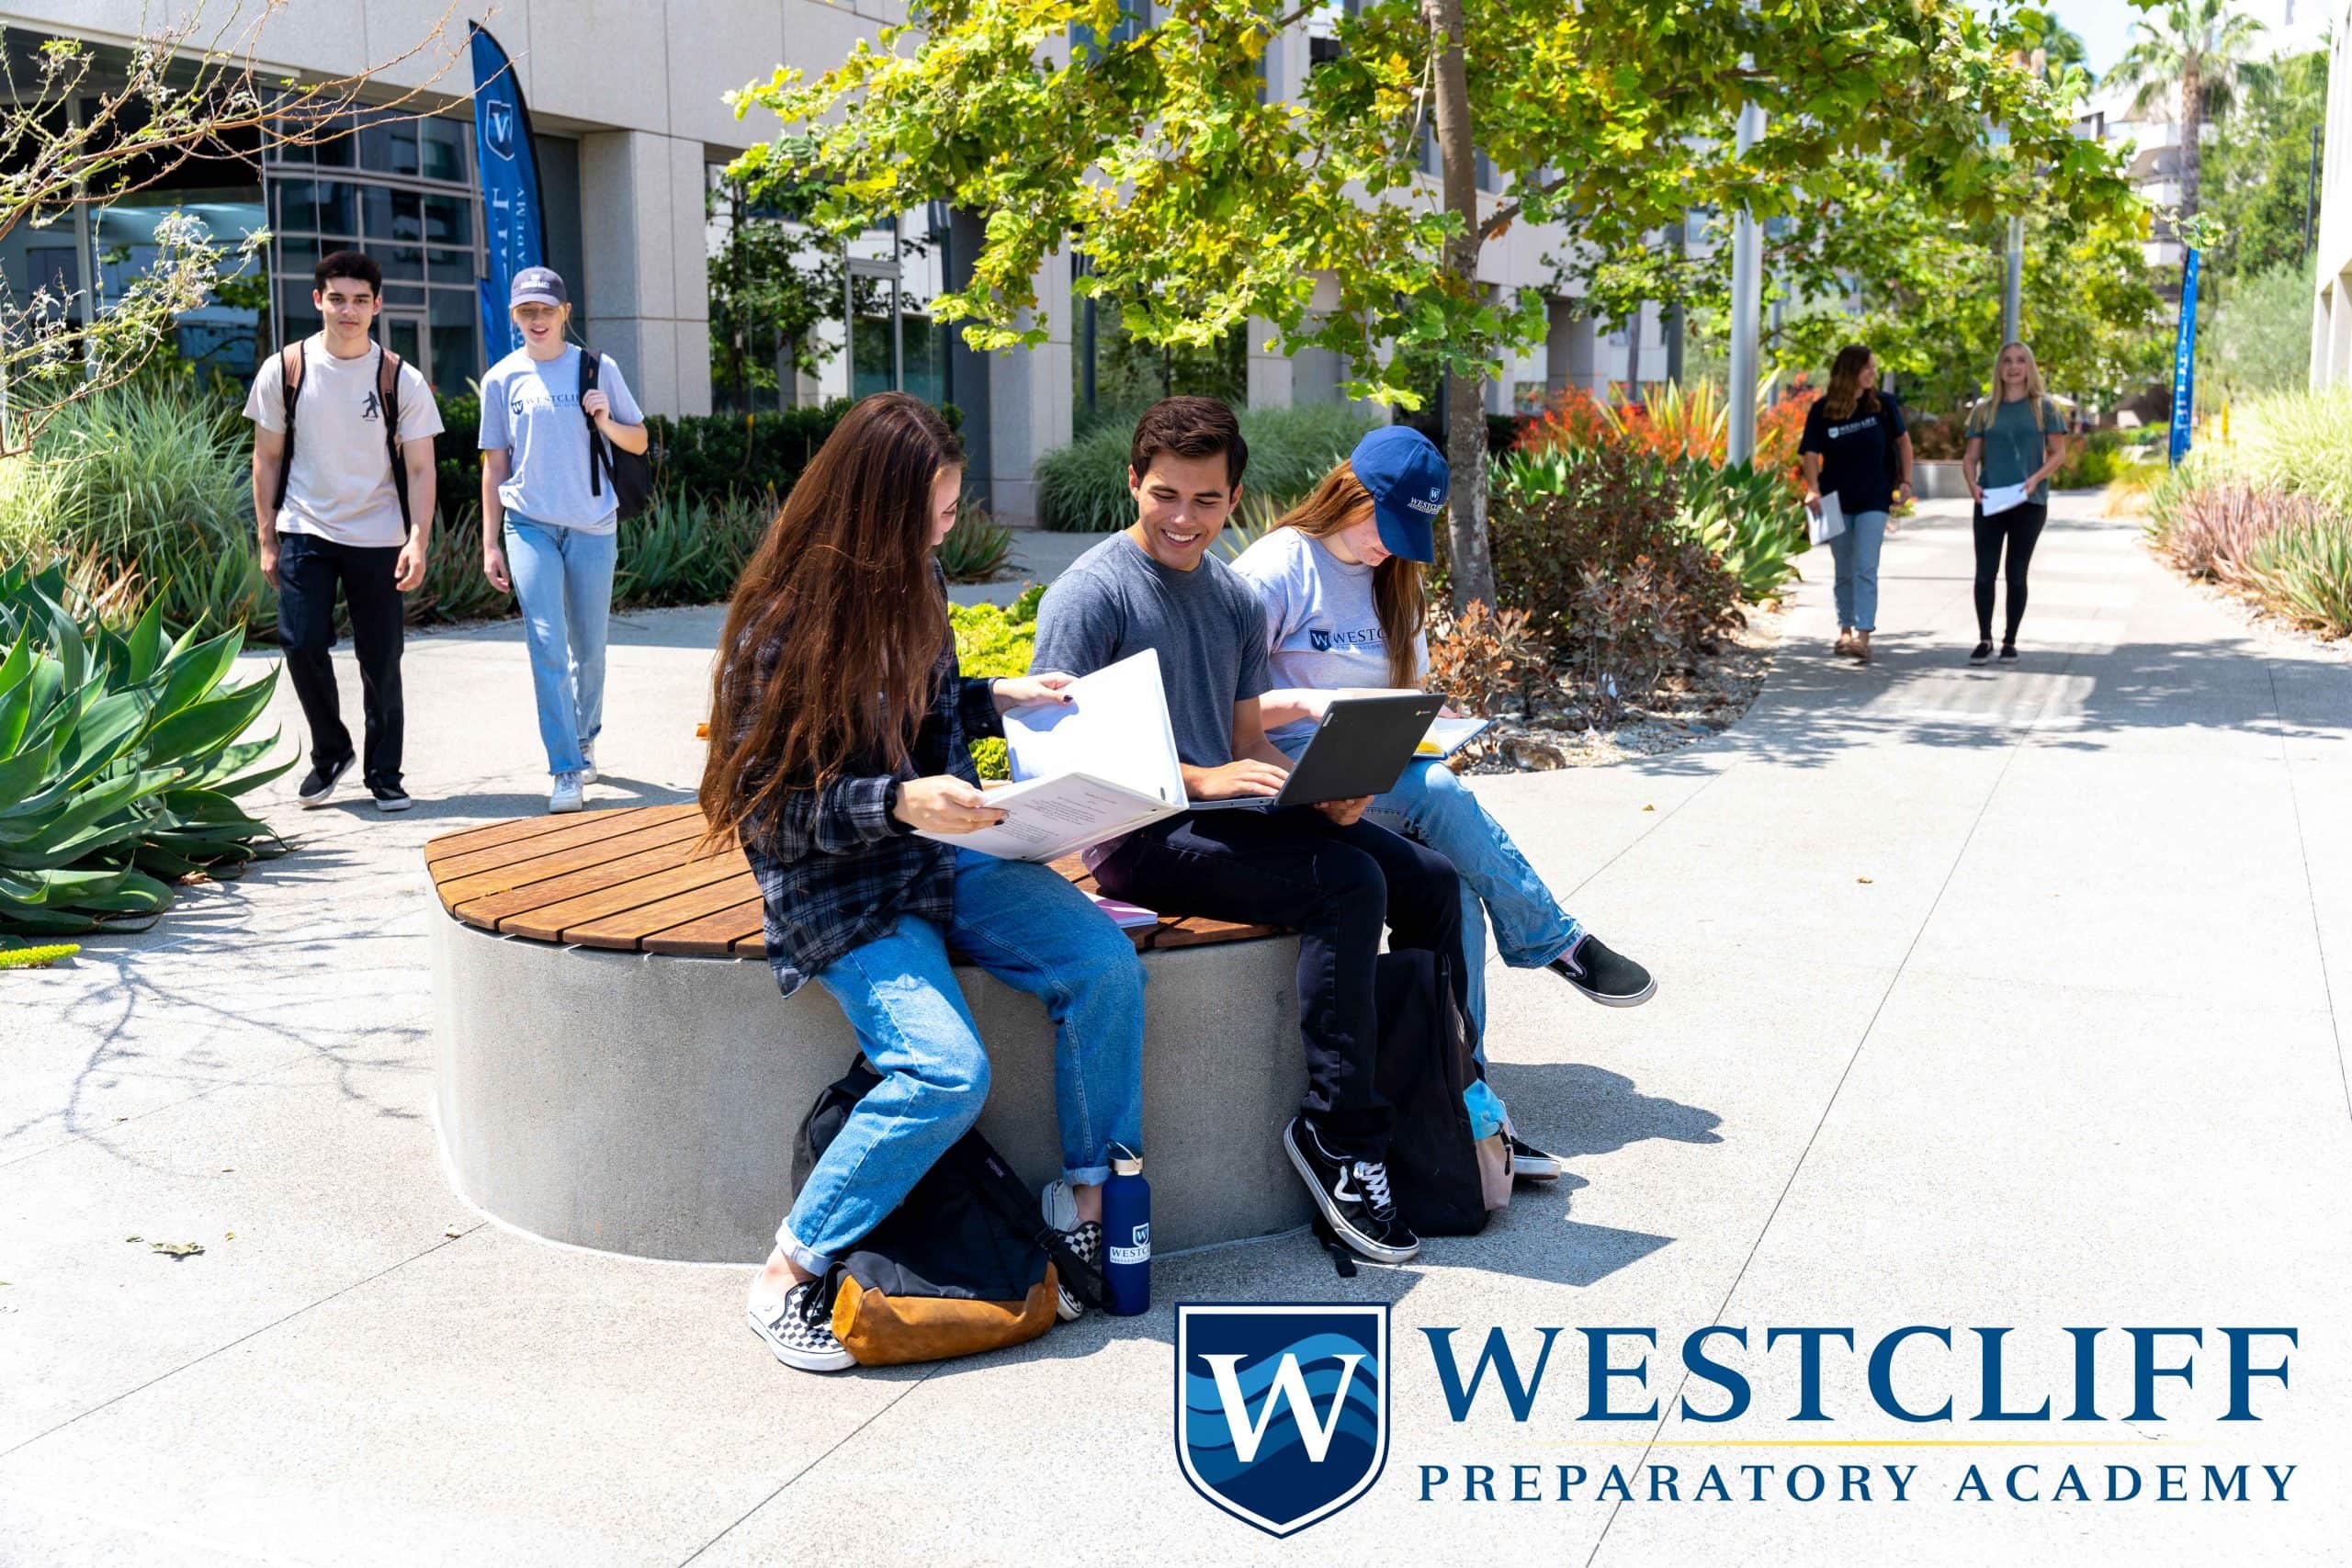 Westcliff Preparatory Academy Offers High School Students The Unique Opportunity to Participate in Collegiate-Level Academics and Athletics